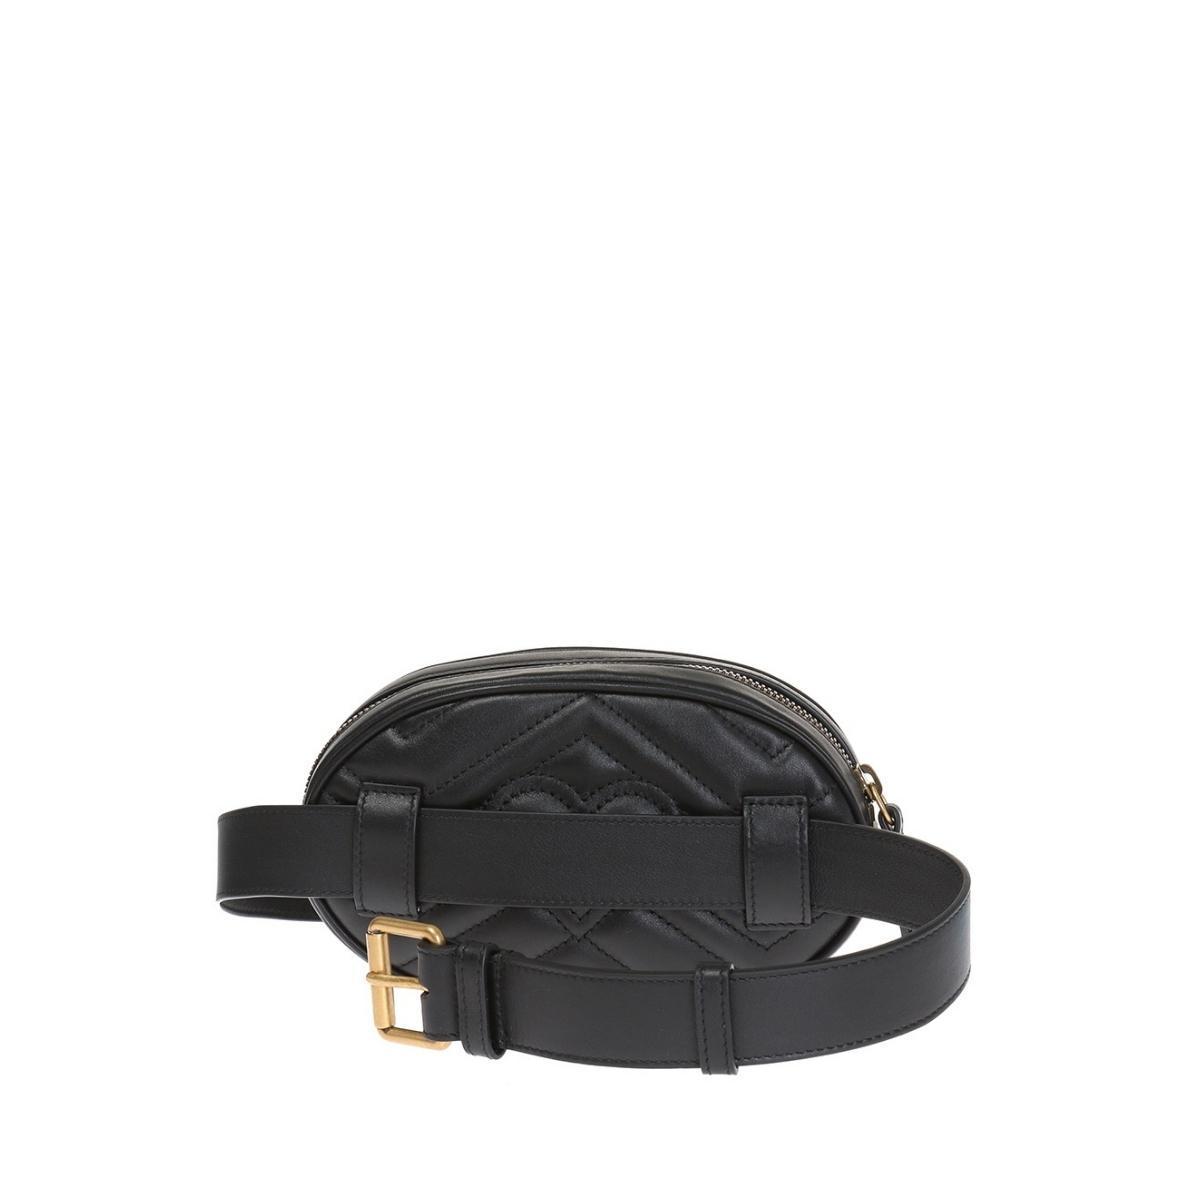 Gucci Matelasse Leather GG Marmont Belt Bag - Size 30 / 75 (SHF-13067) –  LuxeDH